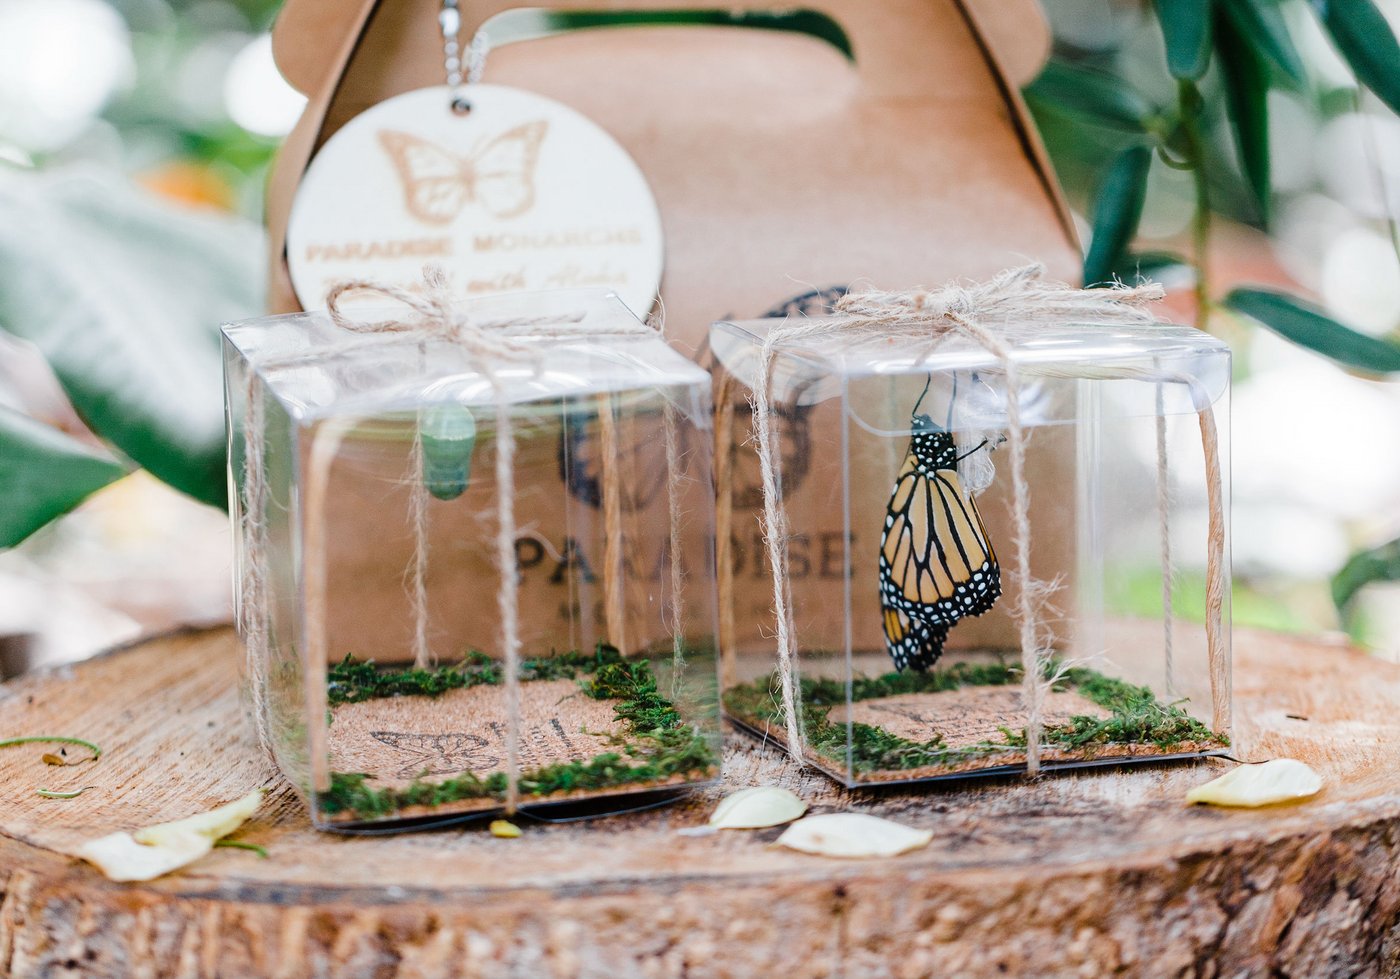 Paradise monarchs monarch butterfly chrysalis box based in Ewa beach Hawaii. Available on Oahu Hawaii great for any special occasion. 